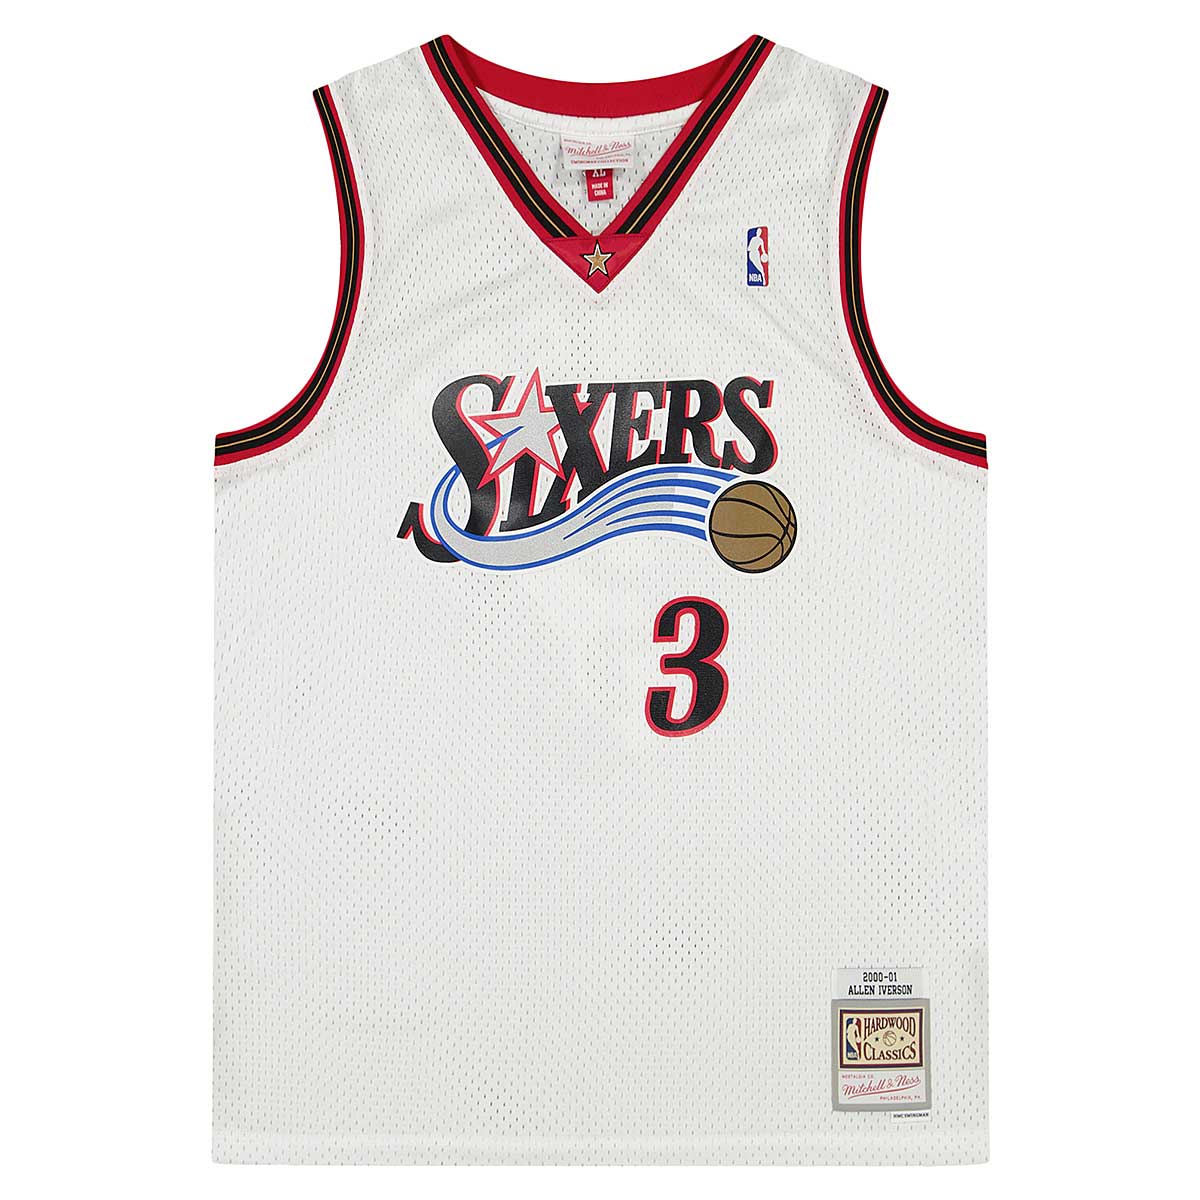 Mitchell Ness M&N Allen Iverson Authentic 76ers Sixers jersey 52 2xl xxl  96-97